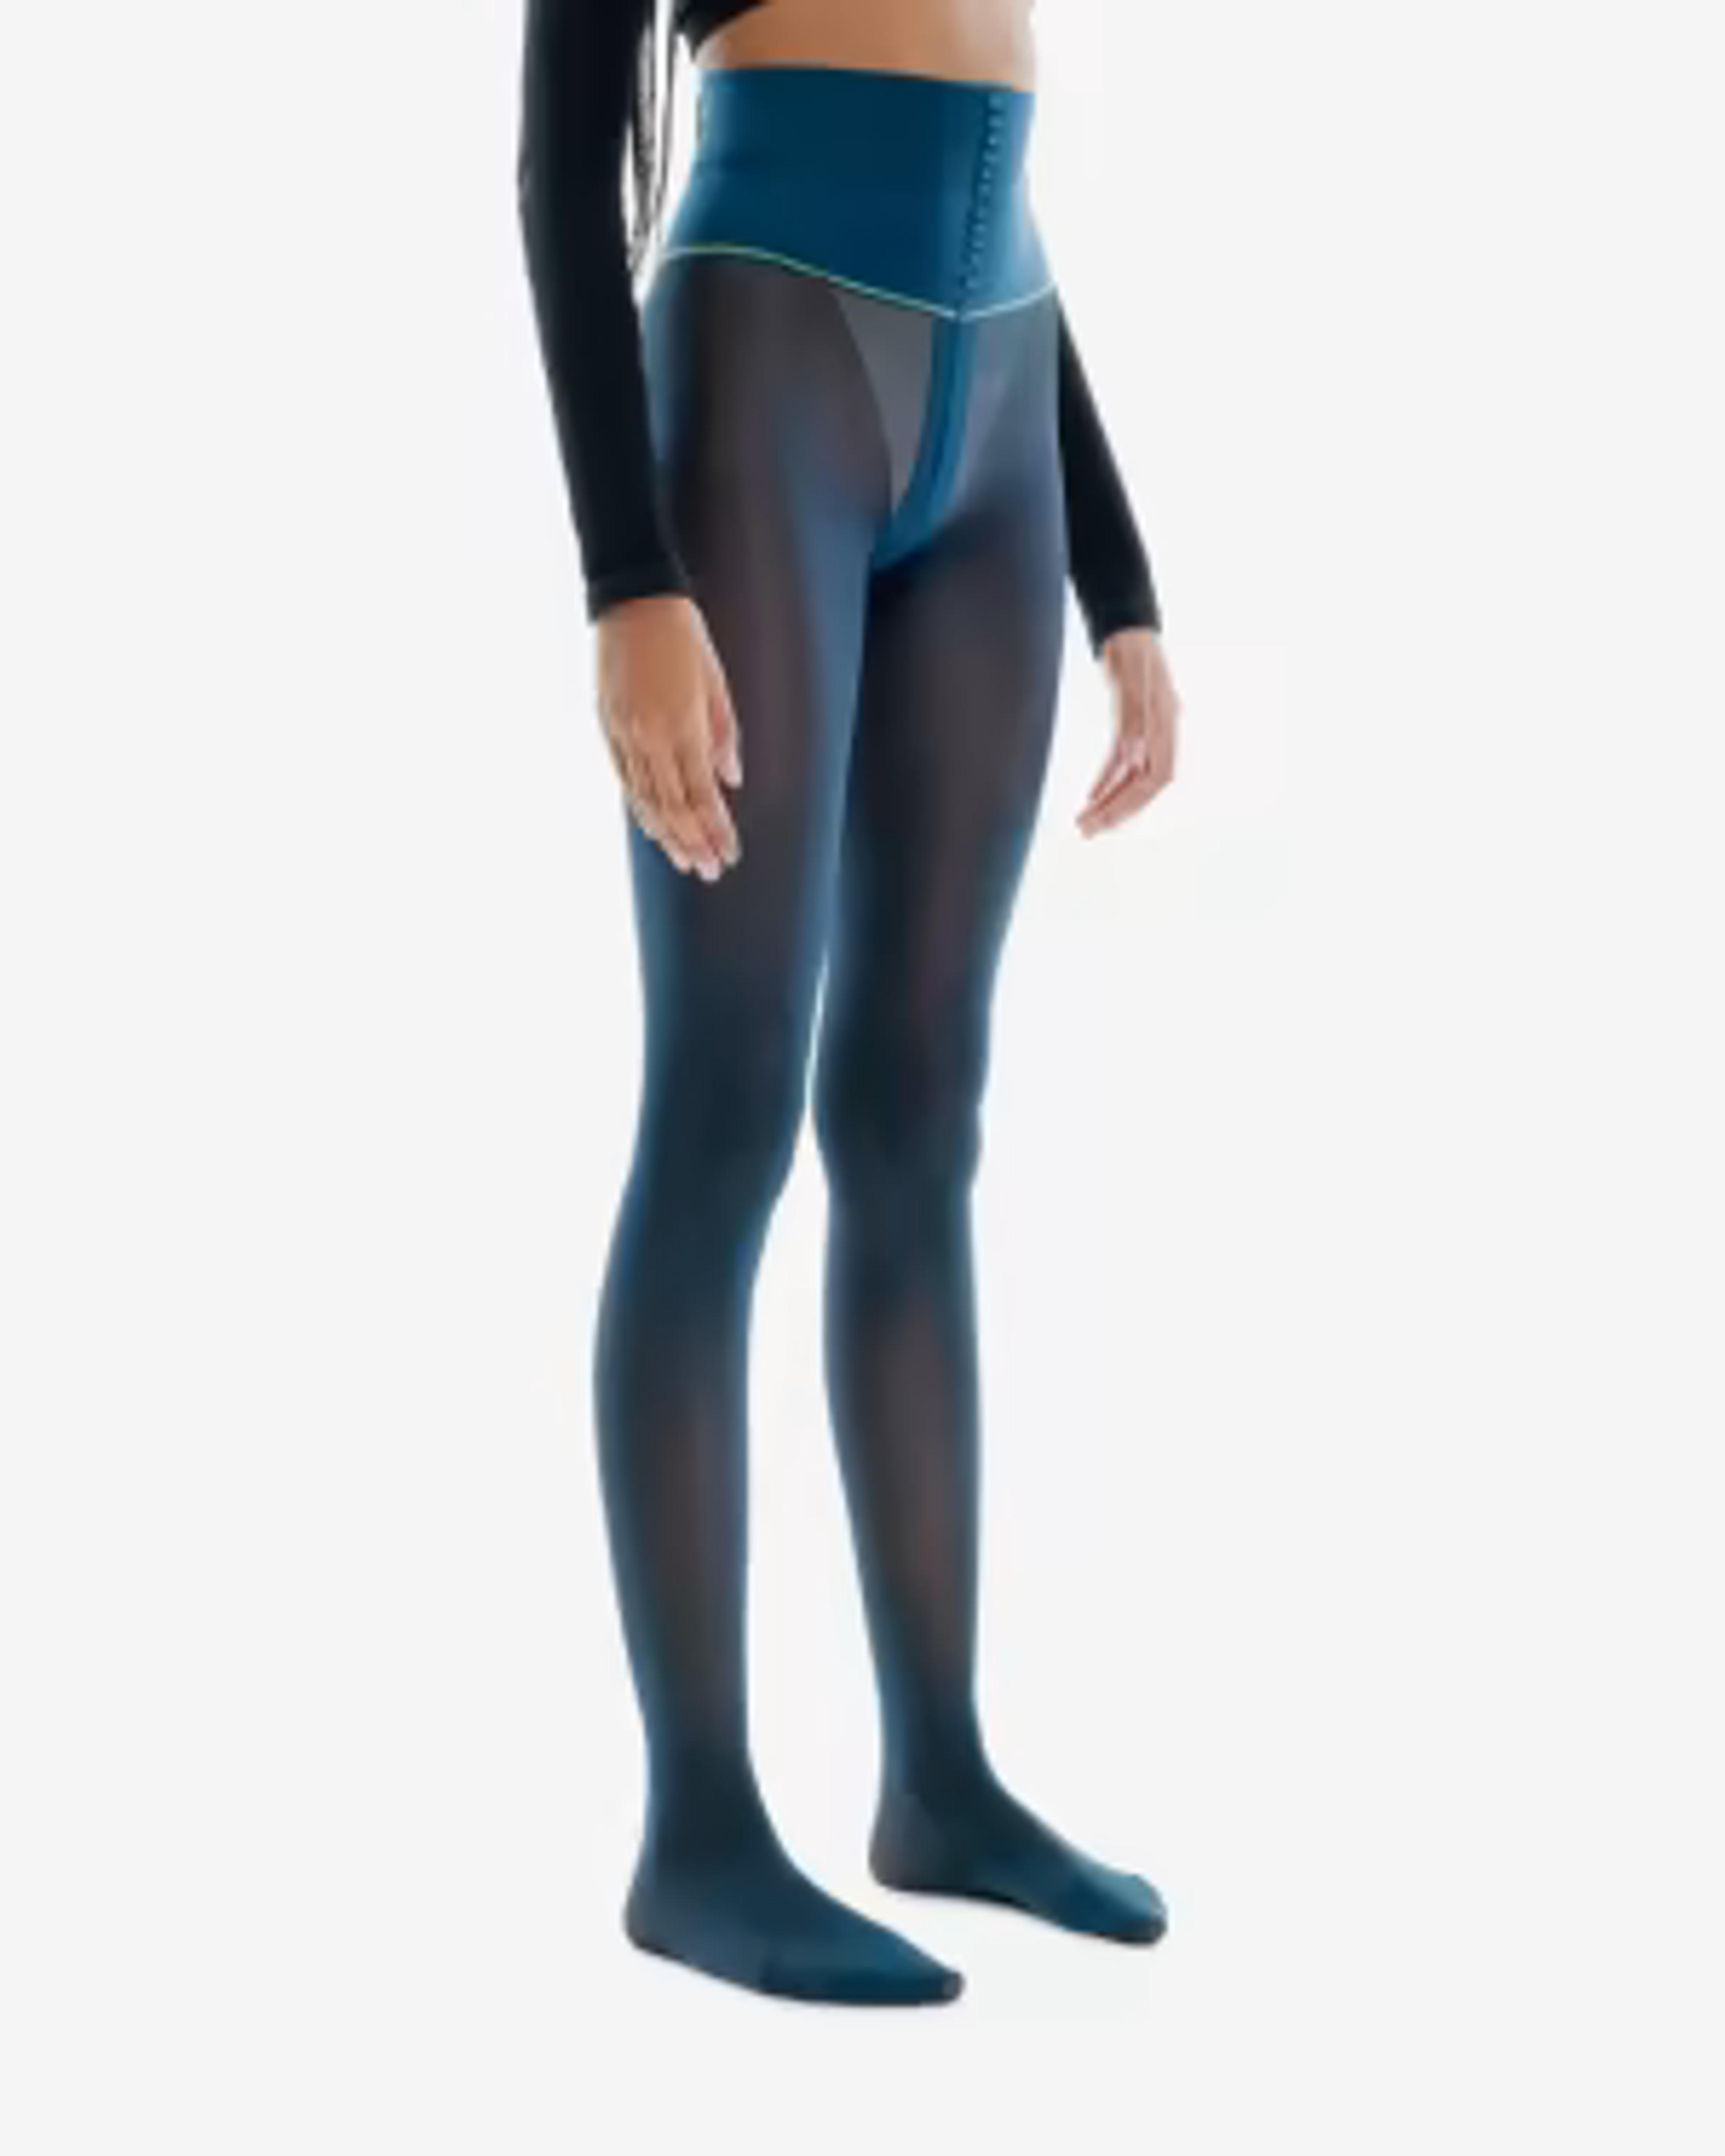 Sheertex | All Products - Our Entire Collection of Resilient Tights